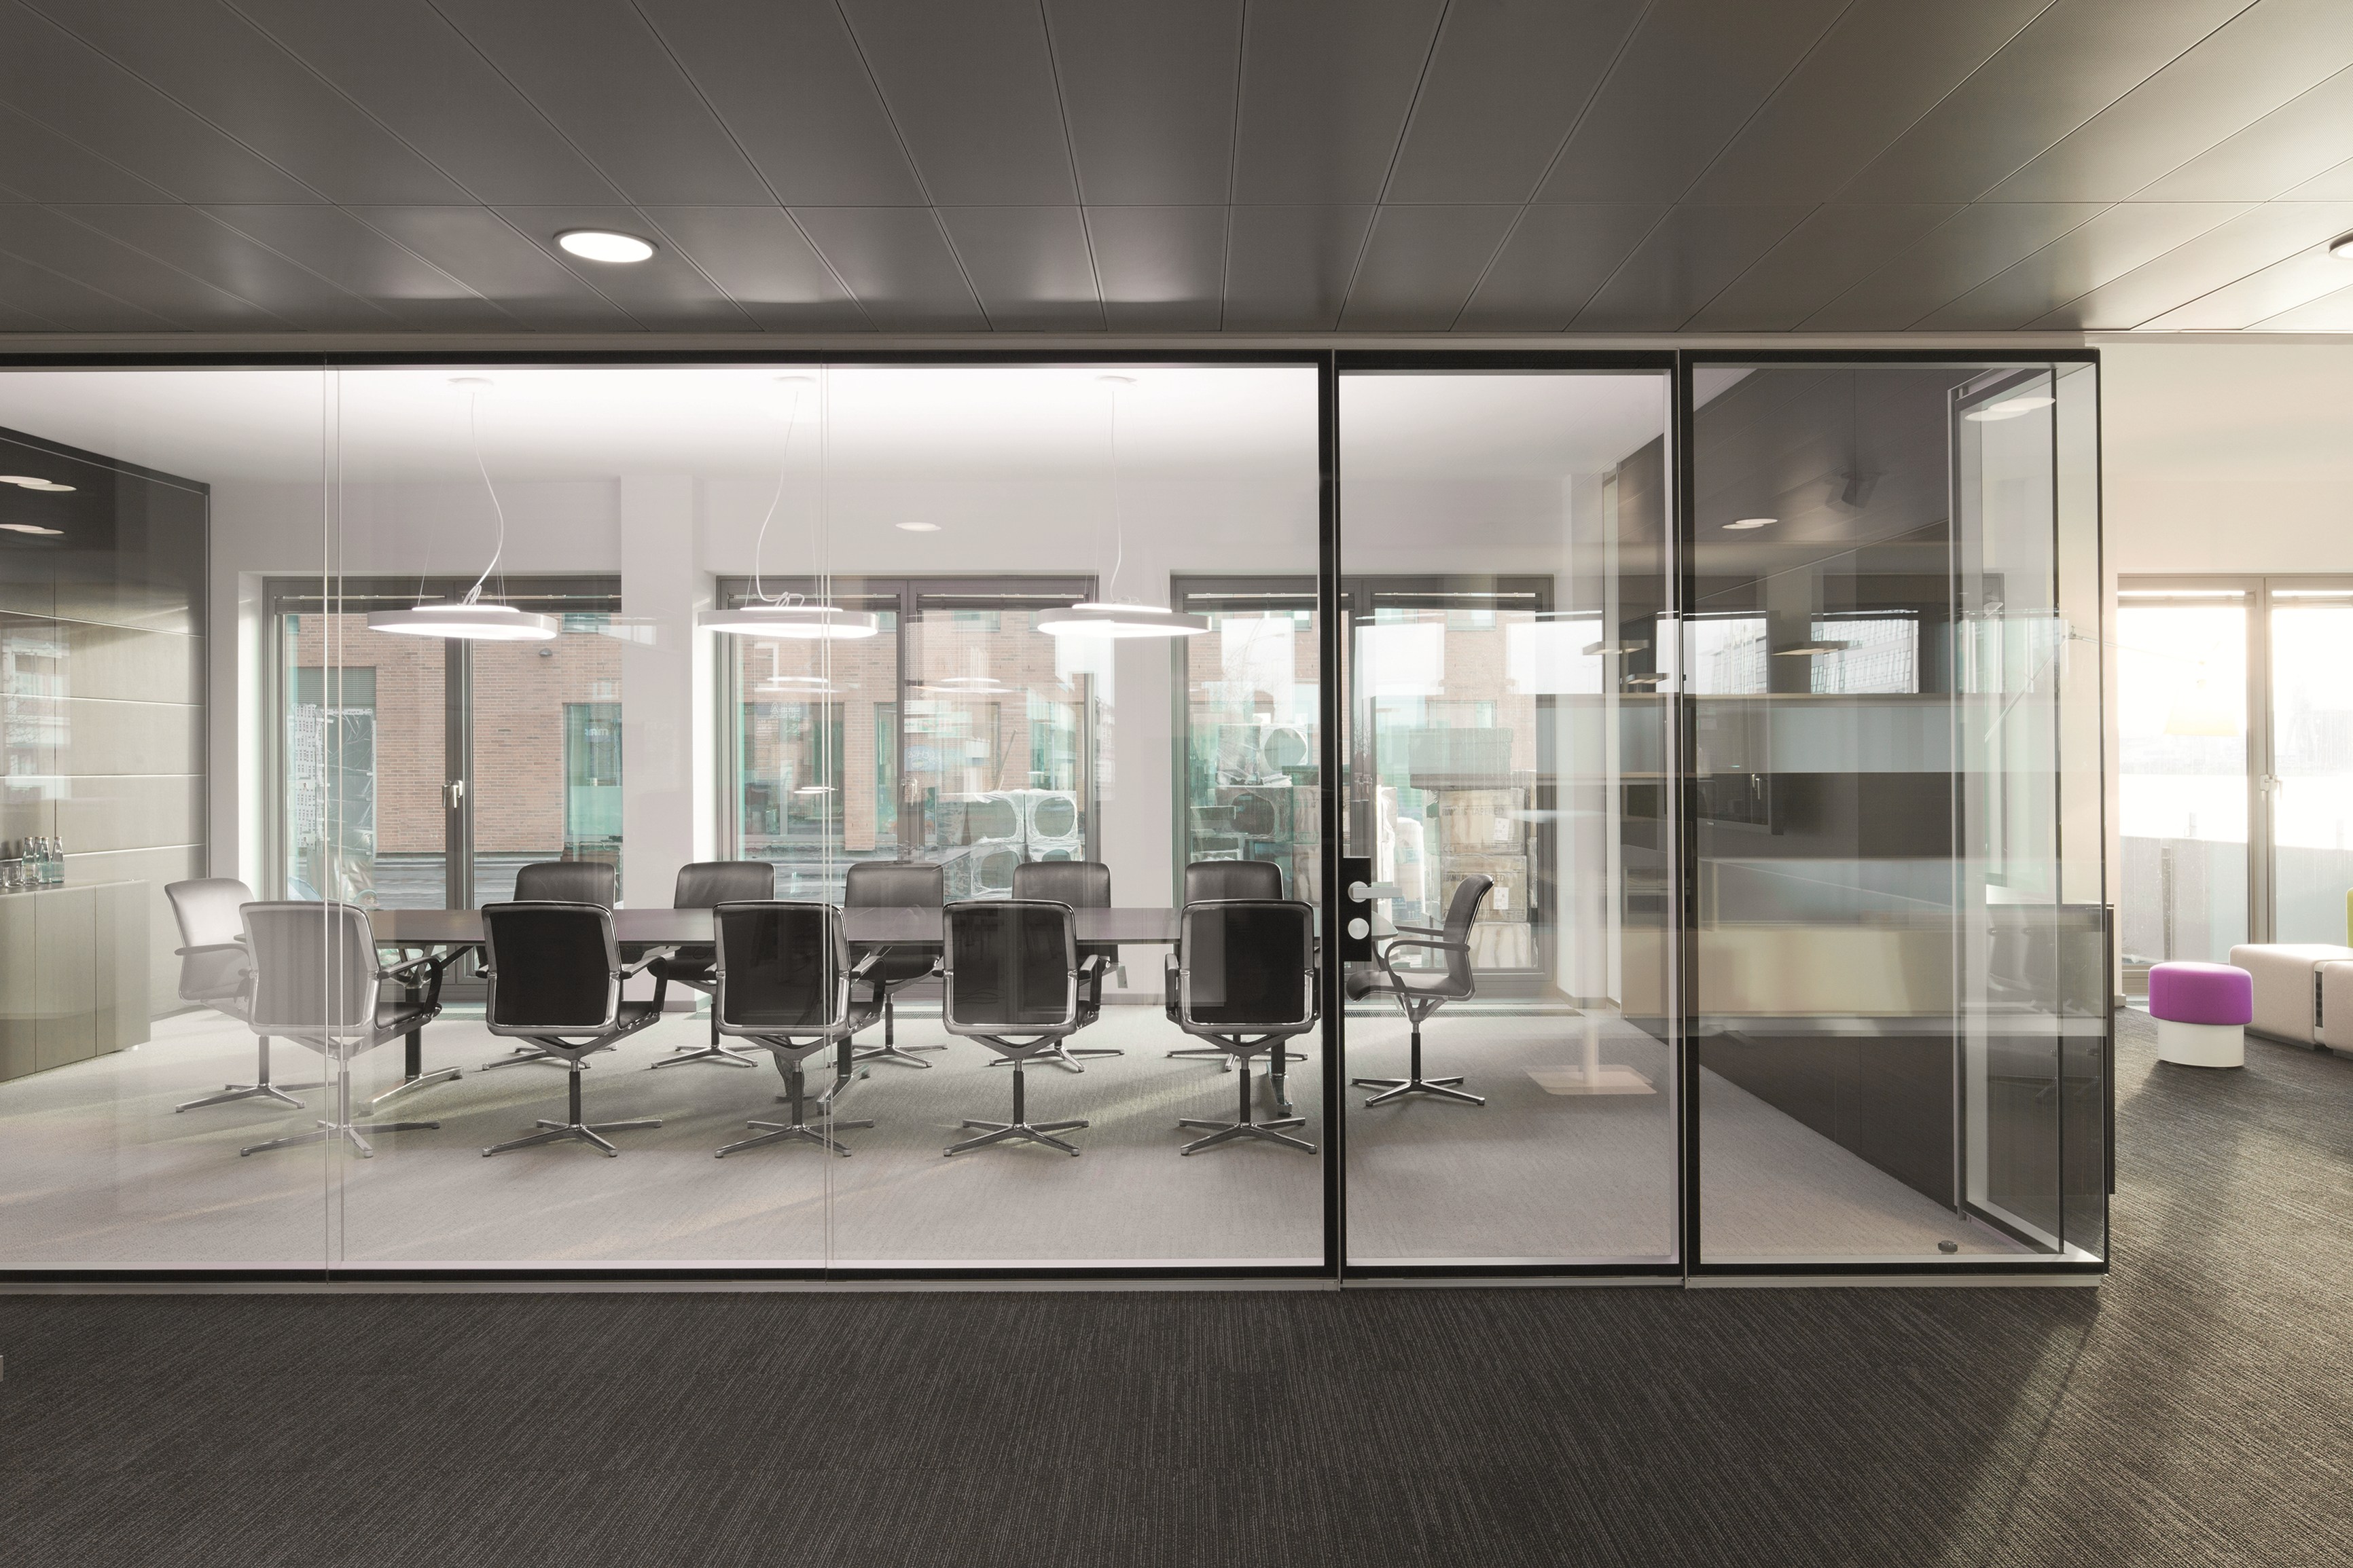 glass office walls partition interior corridor offices rf partitions bene modern frosted stylepark hawk haven acid limited contractor systems midas